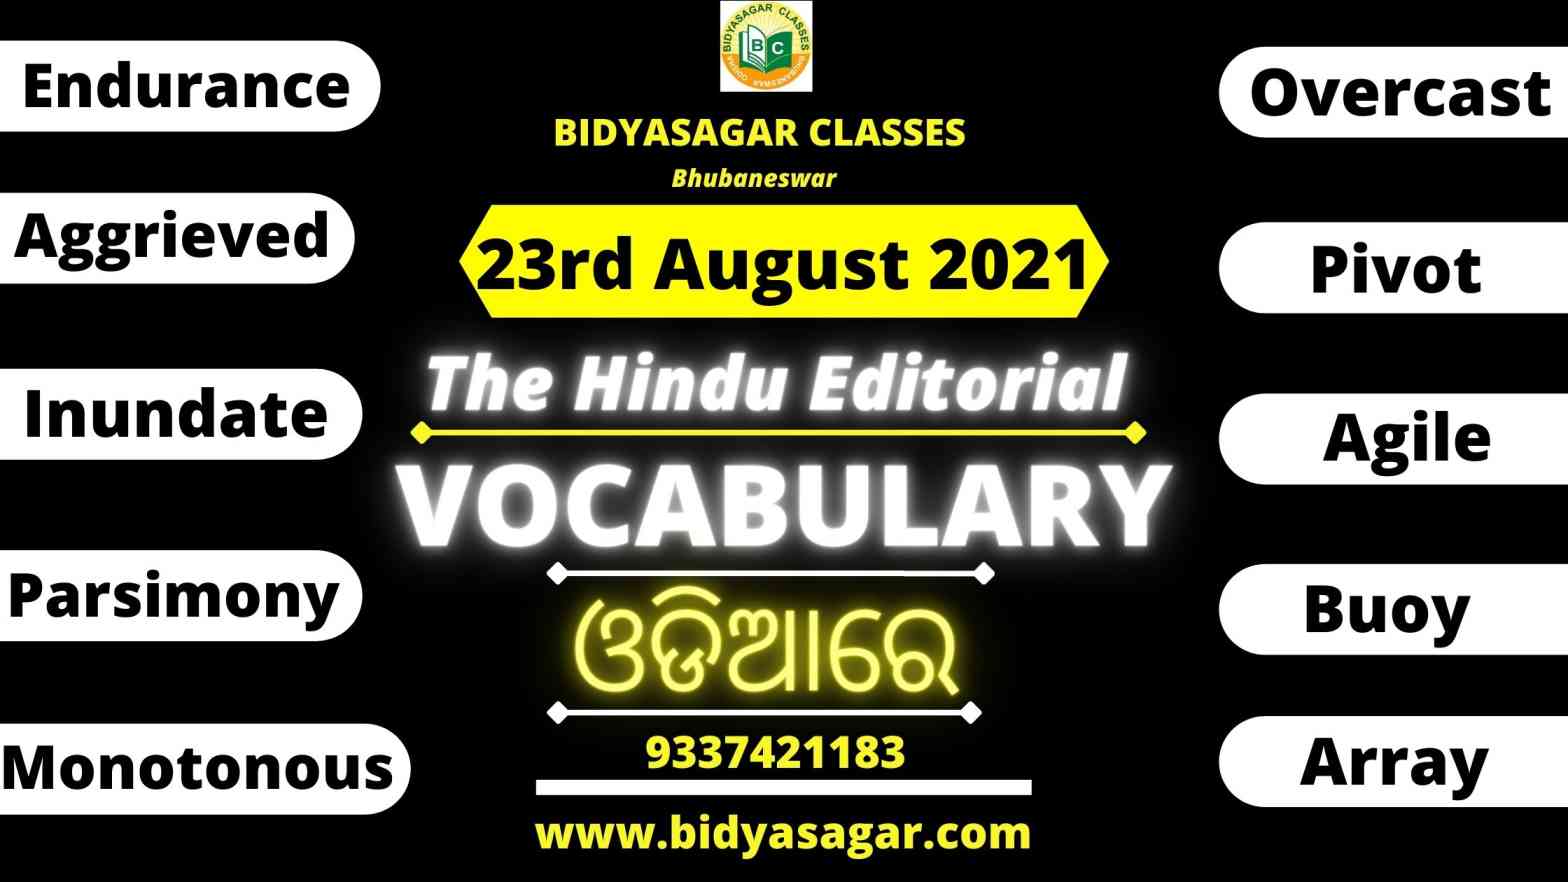 The Hindu Editorial Vocabulary of 23rd August 2021